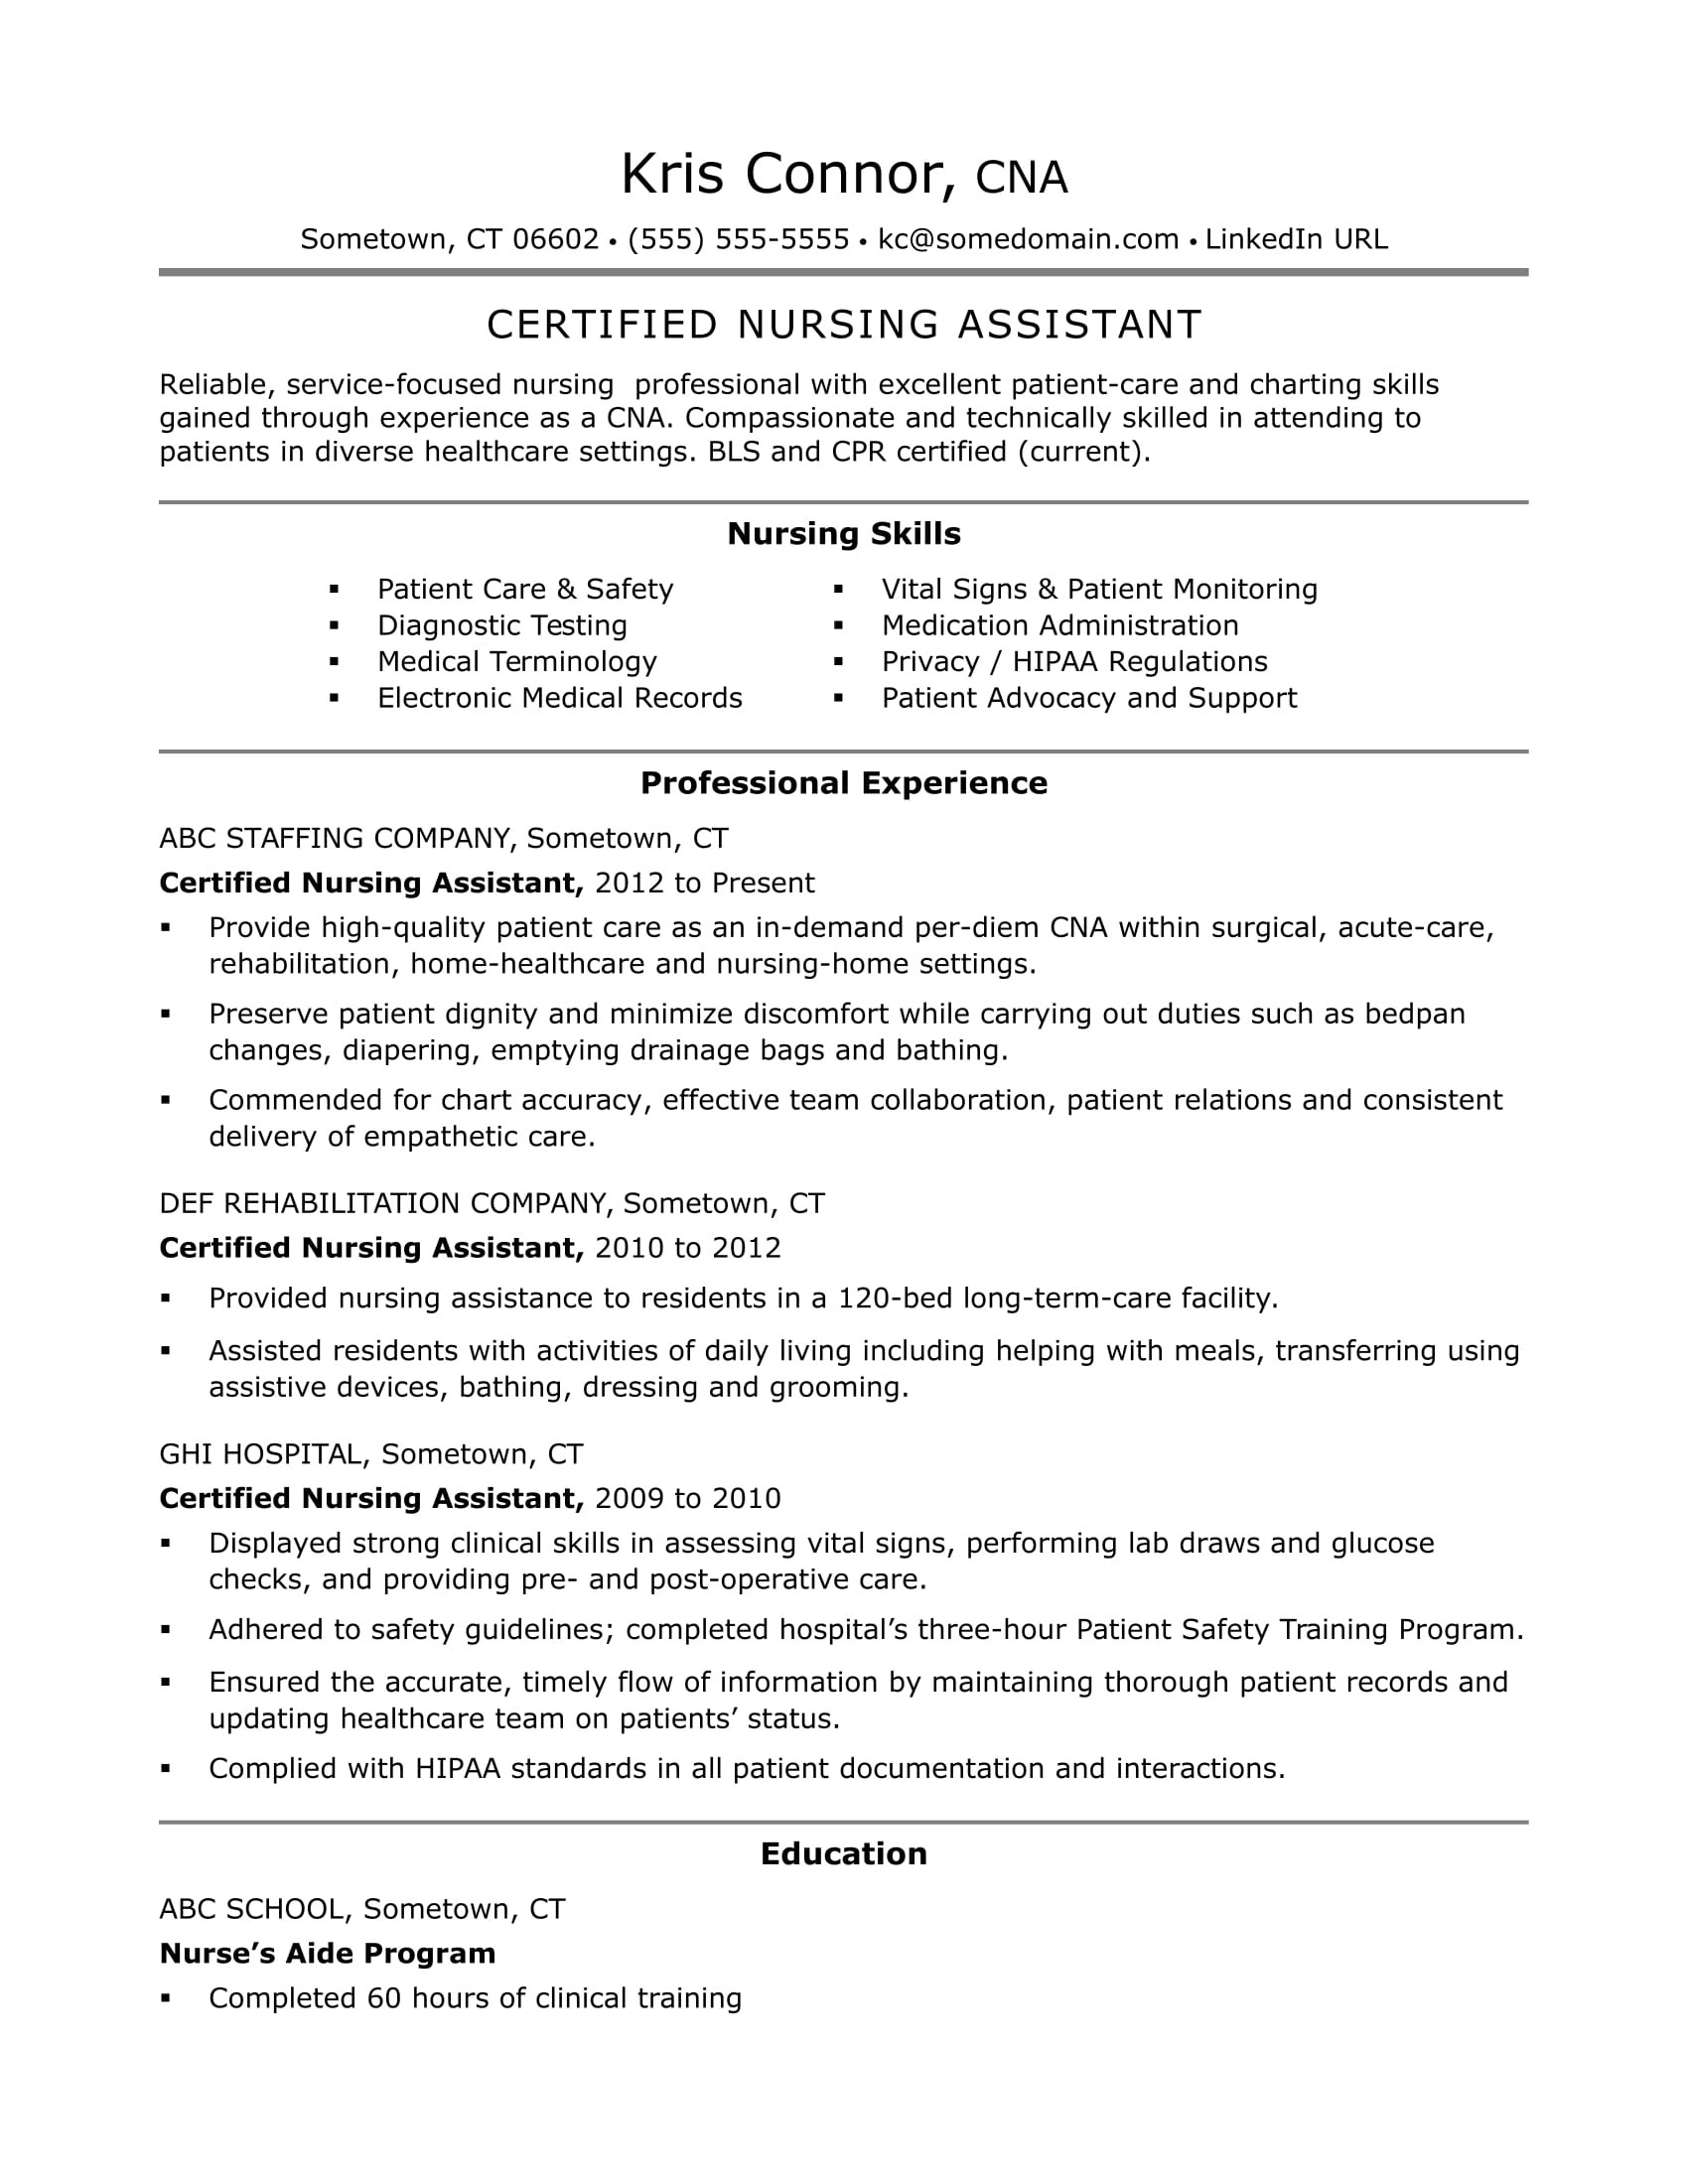 Sample Qualifications In Resume for Nurses Cna Resume Examples: Skills for Cnas Monster.com